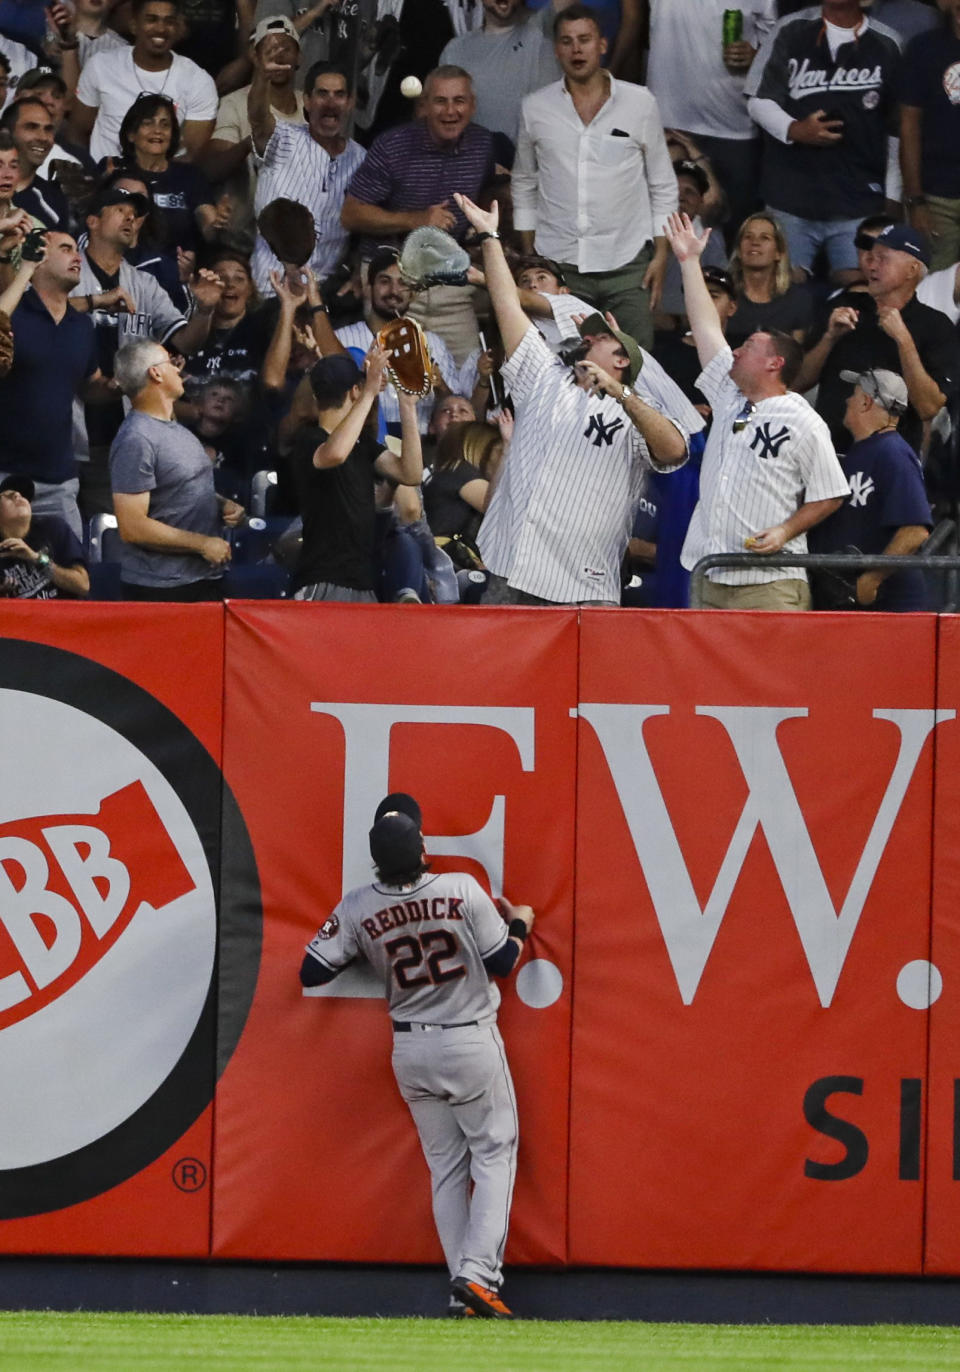 Houston Astros right fielder Josh Reddick (22) watches as fans reach for a two-run home run by New York Yankees' Gio Urshela during the fifth inning of a baseball game Saturday, June 22, 2019, in New York. (AP Photo/Frank Franklin II)